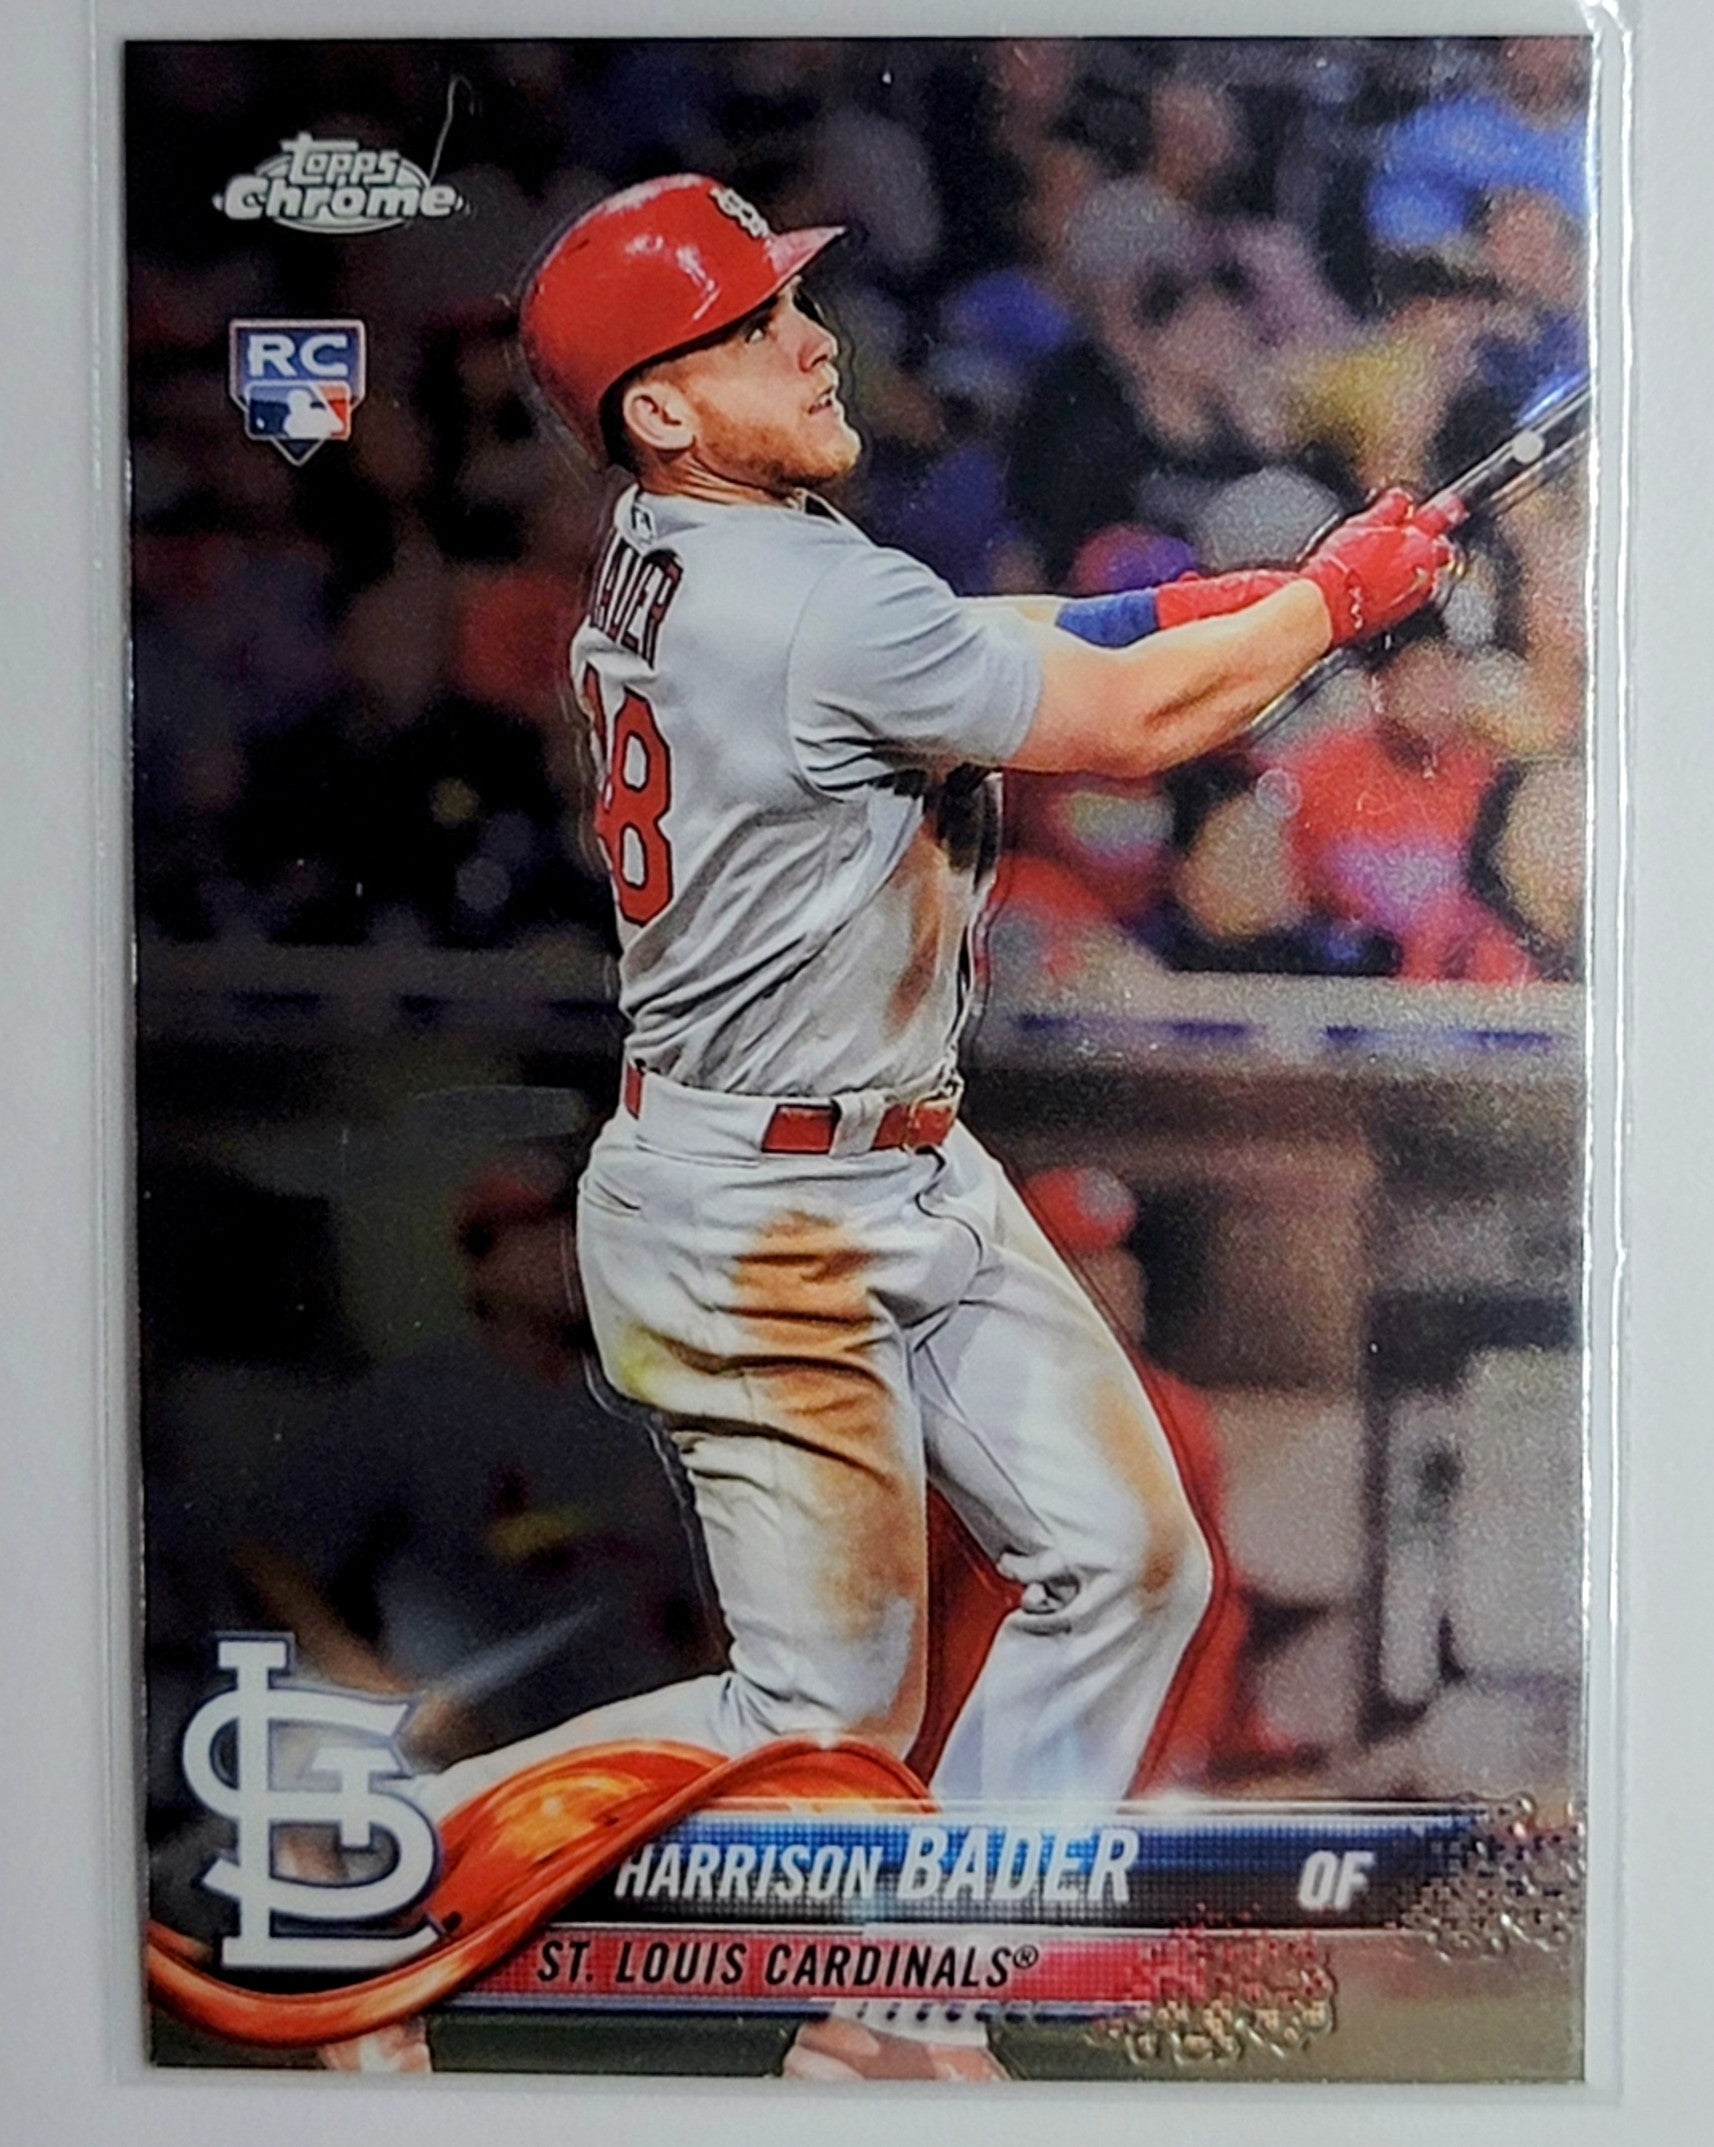 2018 Topps Chrome Harrison Bader St. Louis Cardinals Baseball Card  TH1CB simple Xclusive Collectibles   